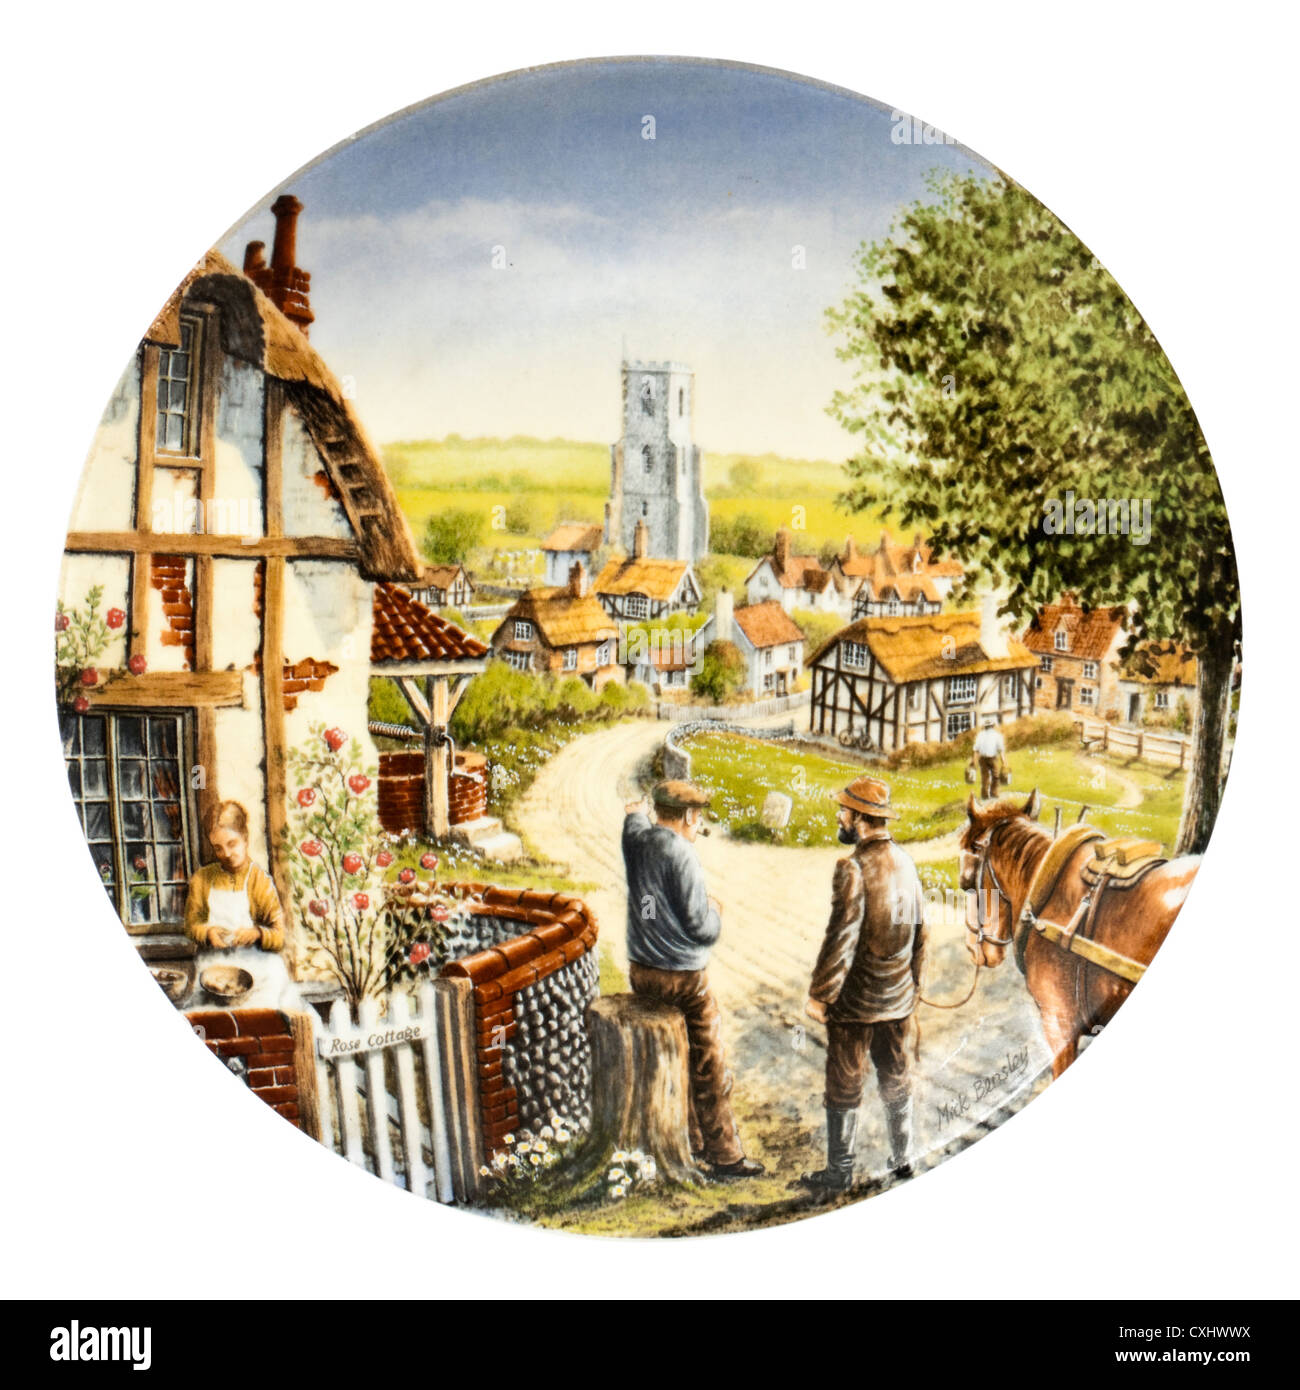 Royal Doulton porcelain collector plate - 'Rose Cottage', first issue in the 'Journey Through the Village' series Stock Photo